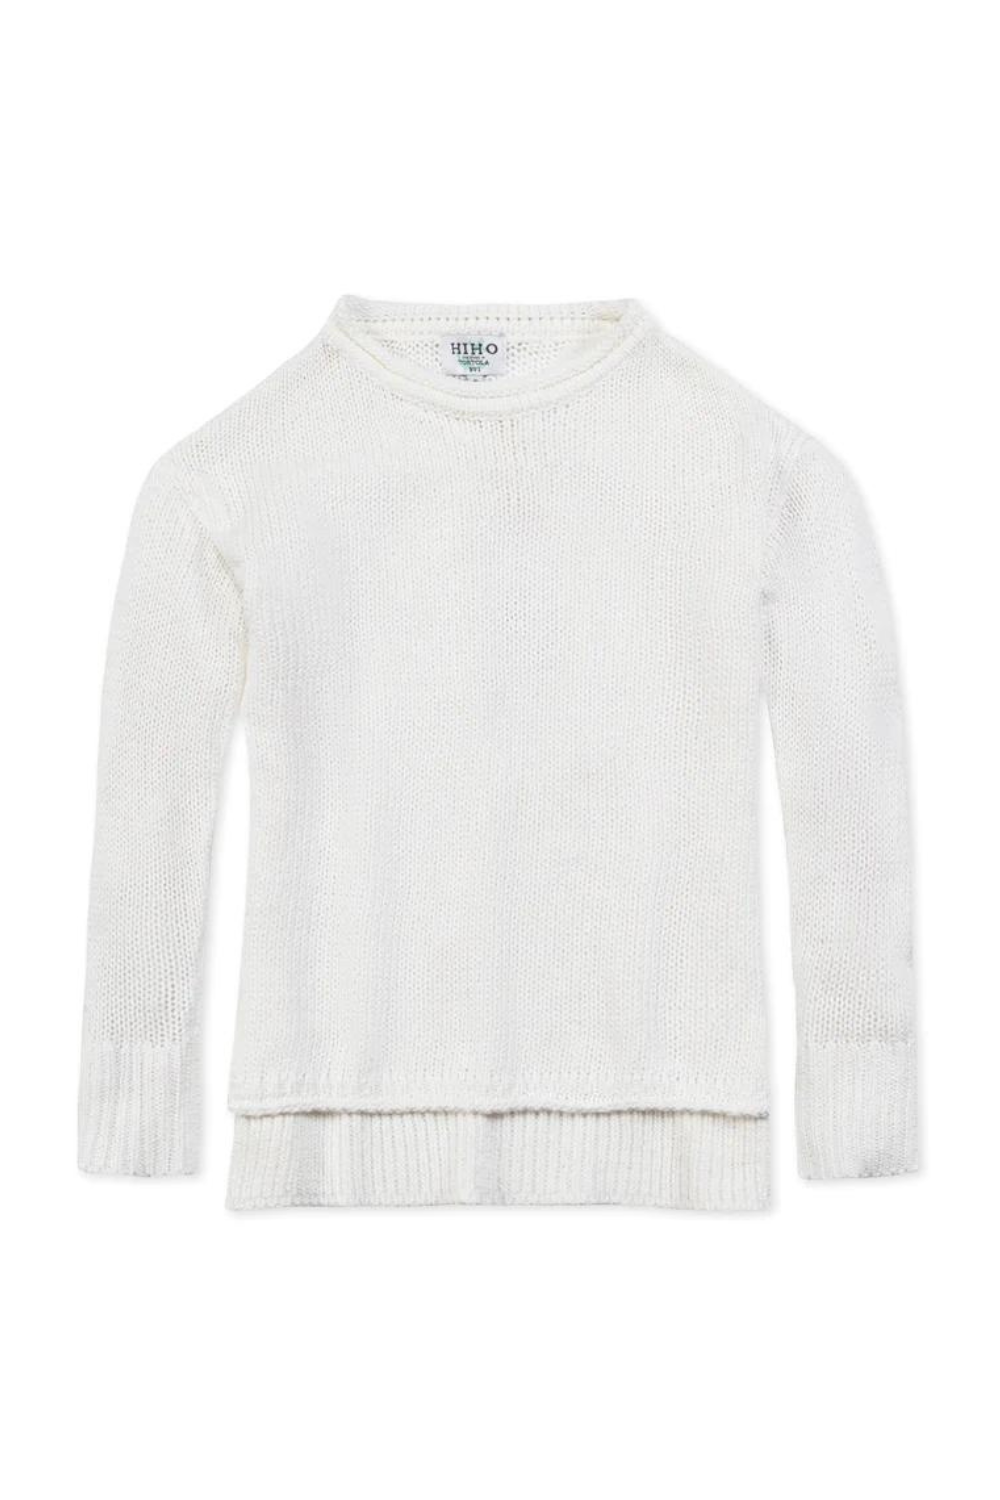 HIHO Relaxed Crew Sweater - White